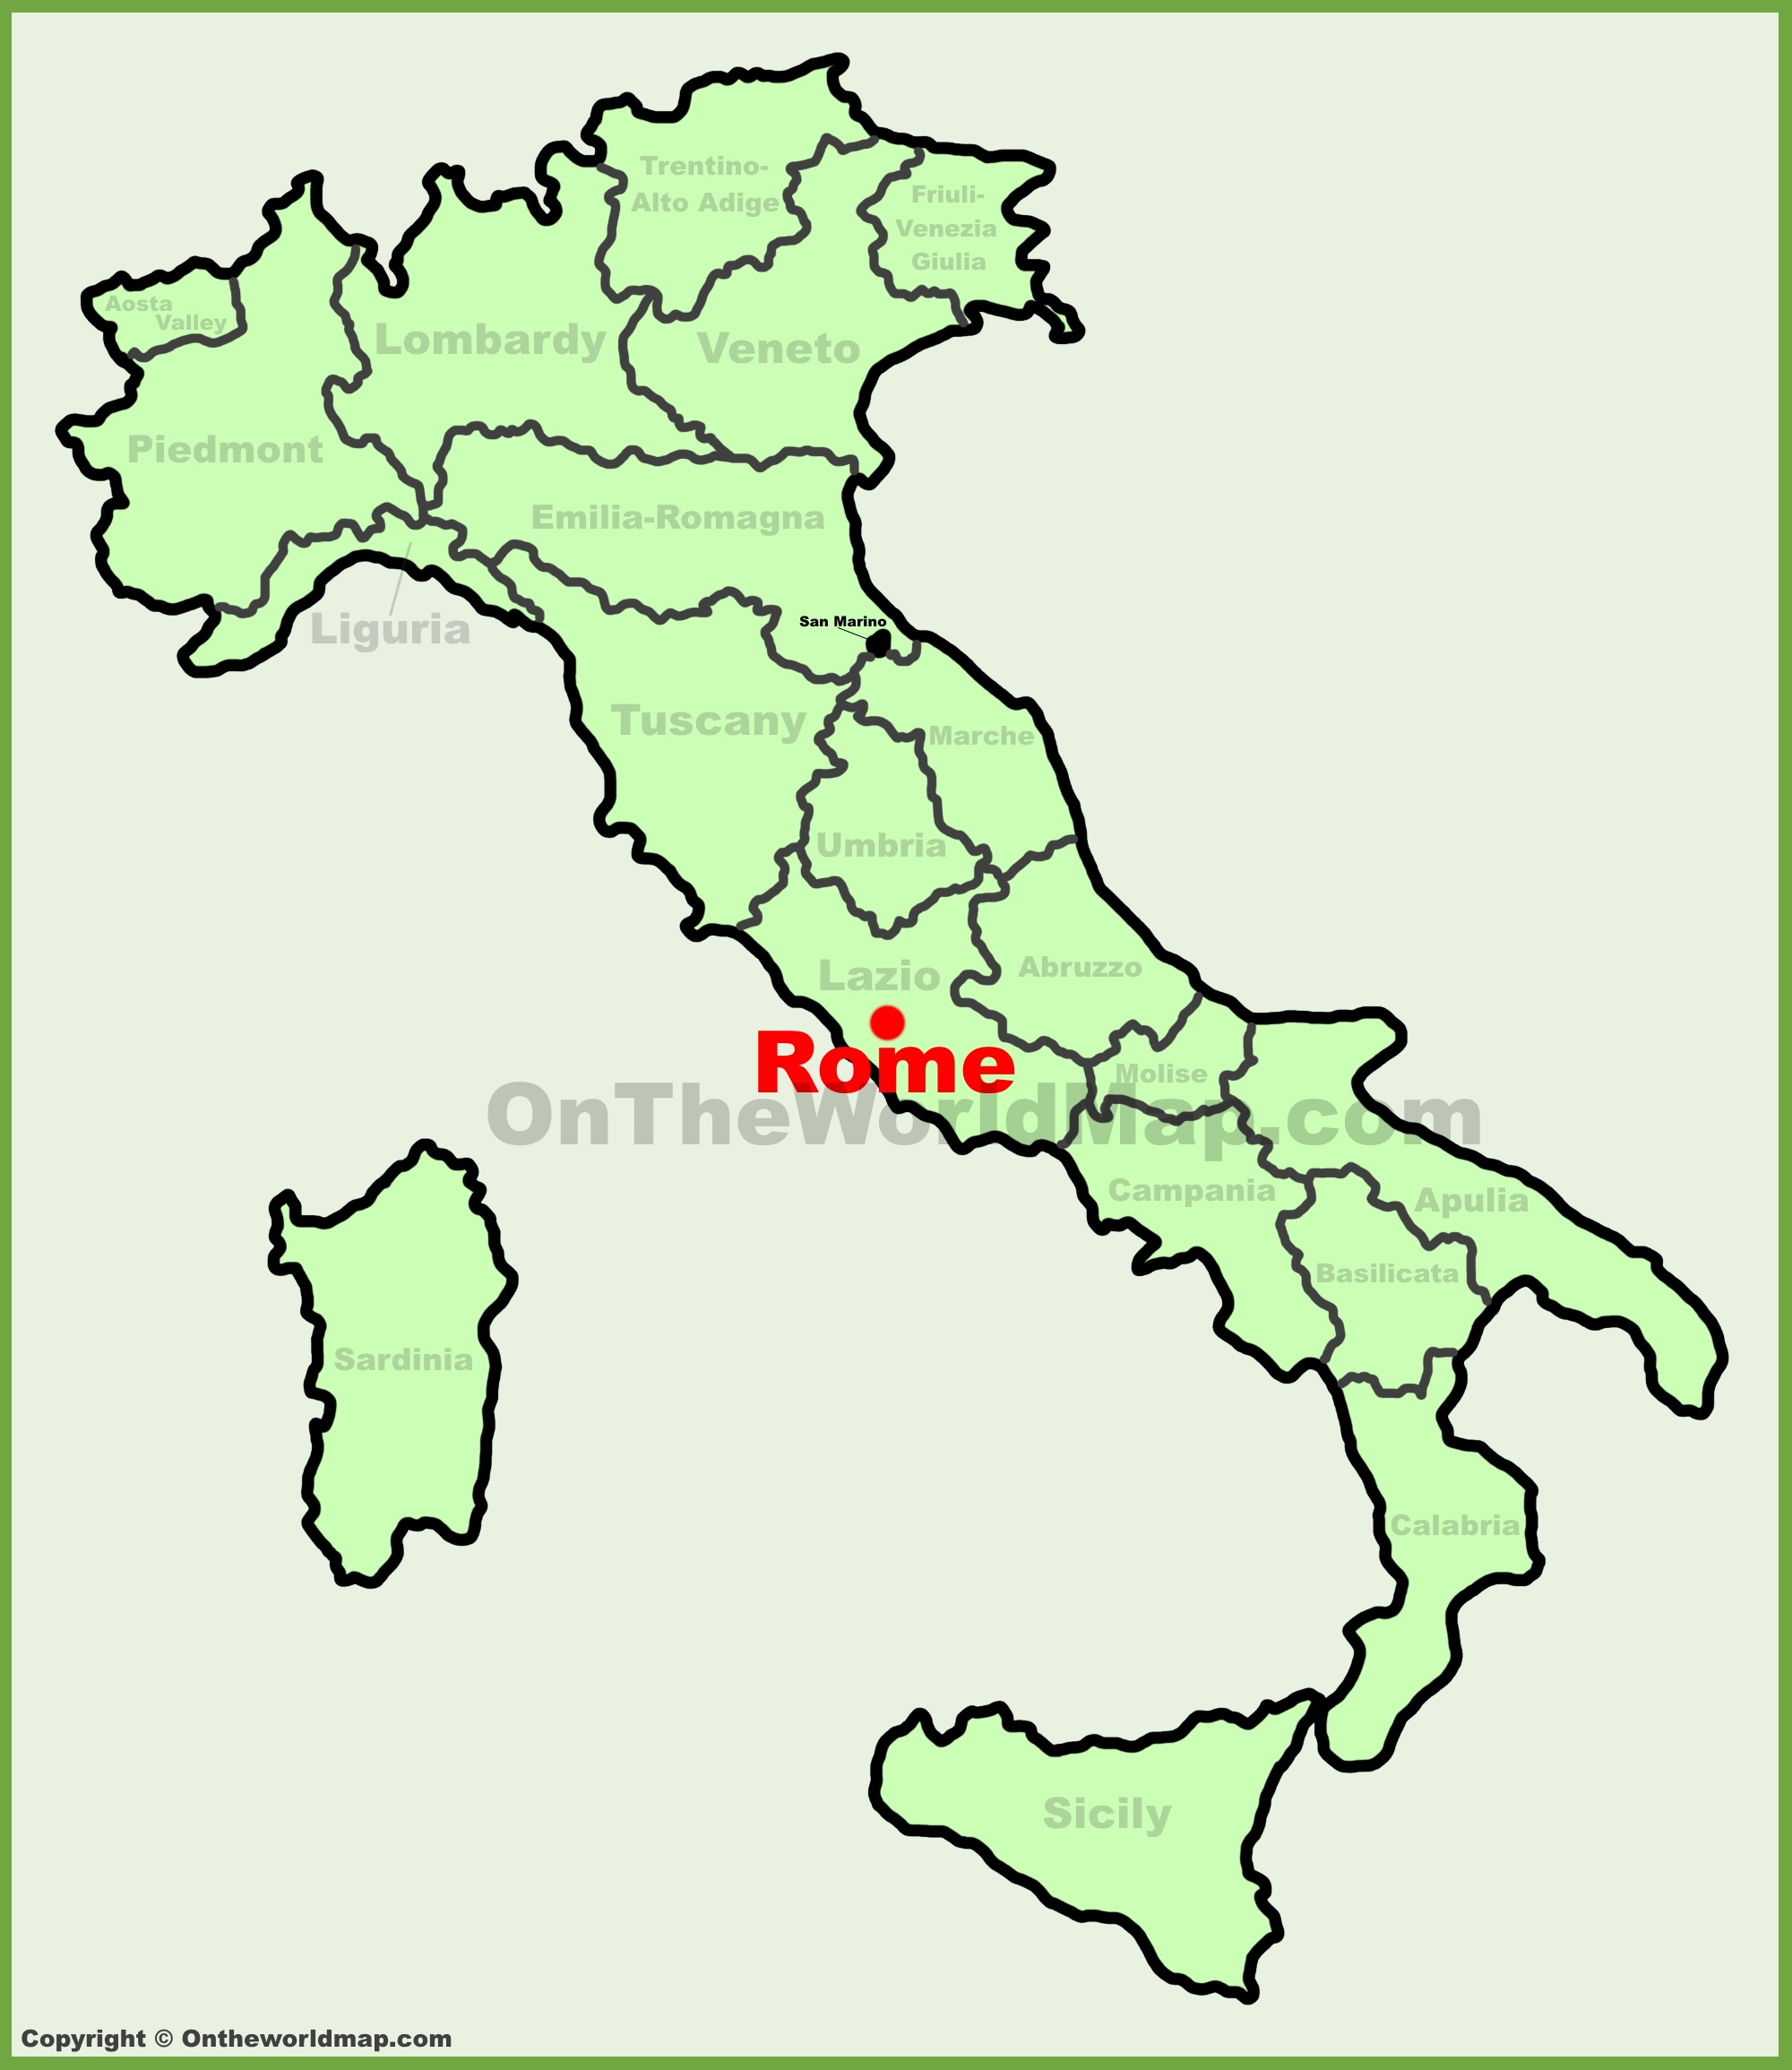 Rome Location On The Italy Map